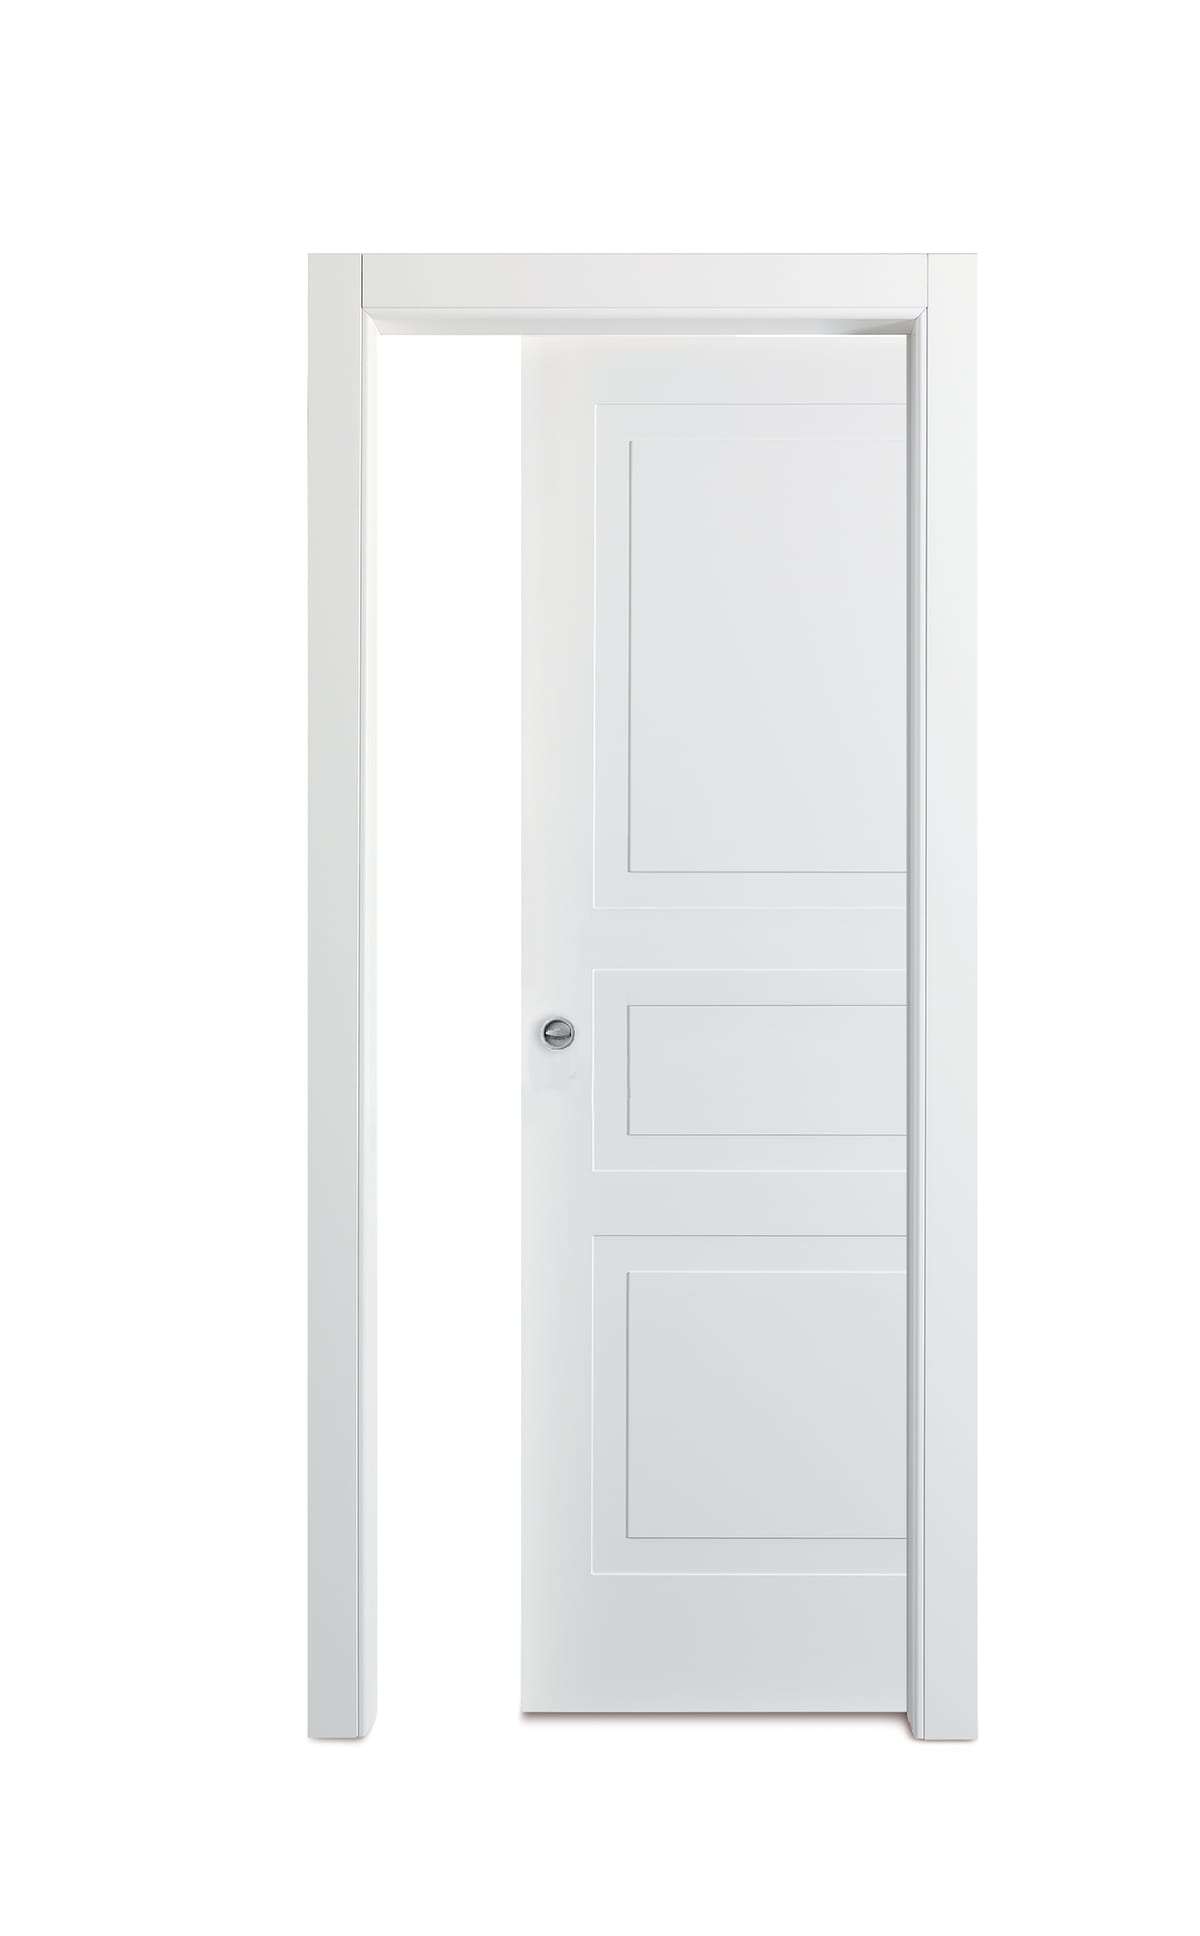 INTERIOR WALL SLIDING DOOR CLASS 210X80 WHITE LACQUERED